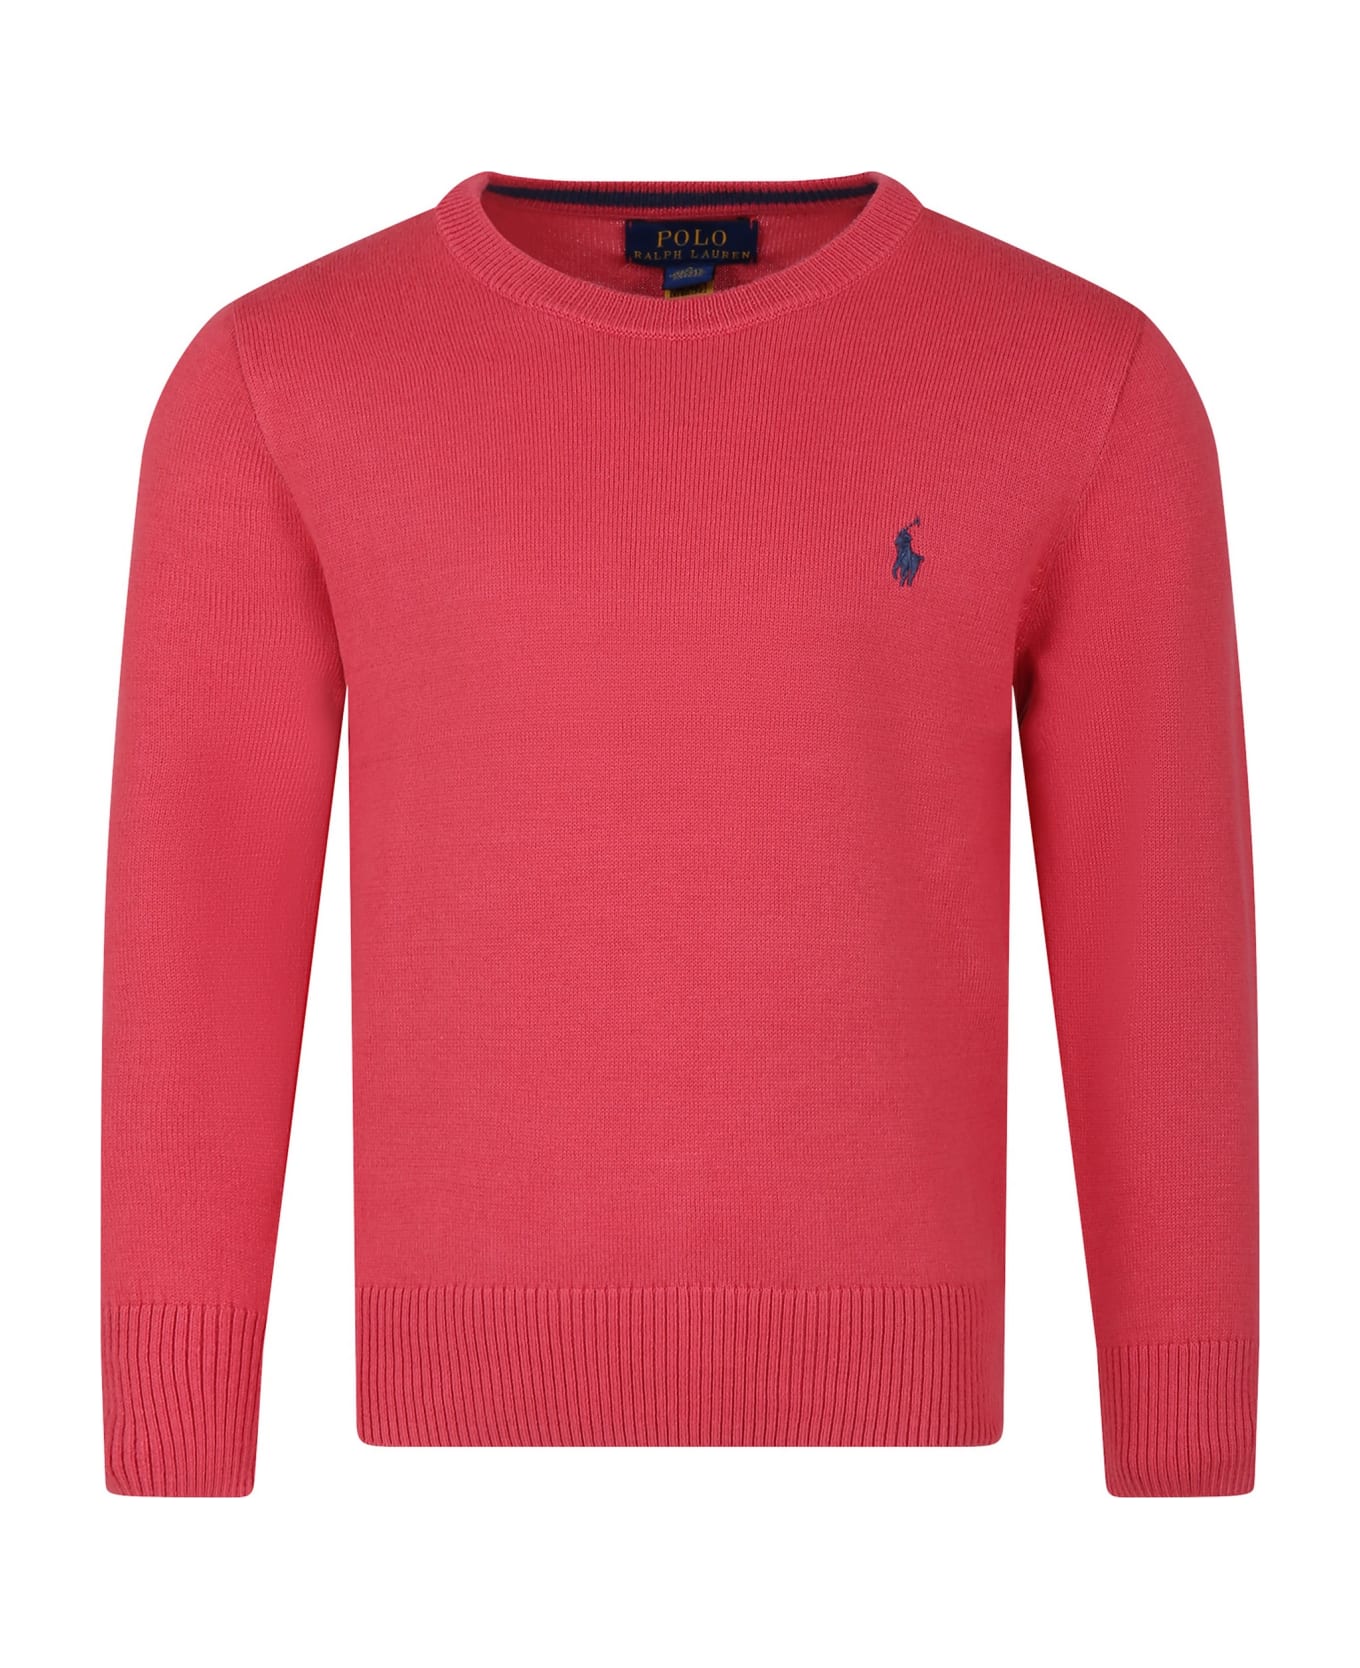 Ralph Lauren Red Sweater For Boy With Embroidery - Red ニットウェア＆スウェットシャツ